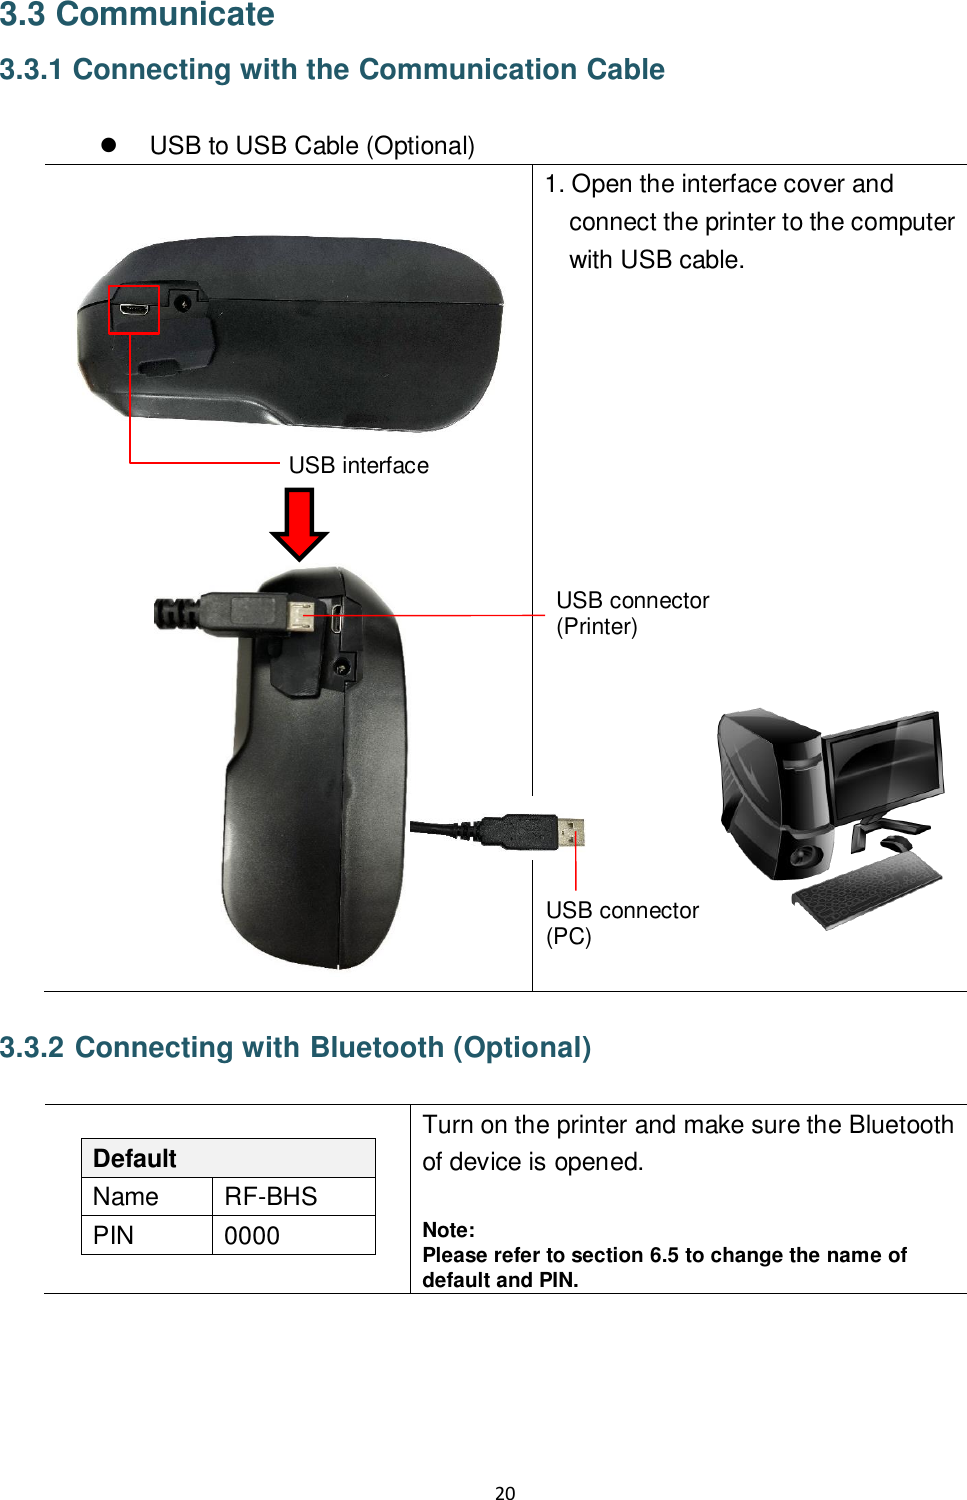 20  3.3 Communicate 3.3.1 Connecting with the Communication Cable    USB to USB Cable (Optional)    1. Open the interface cover and connect the printer to the computer with USB cable.          3.3.2 Connecting with Bluetooth (Optional)   Default Name RF-BHS PIN 0000 Turn on the printer and make sure the Bluetooth of device is opened.  Note: Please refer to section 6.5 to change the name of default and PIN.   USB interface USB connector (PC) USB connector (Printer) 